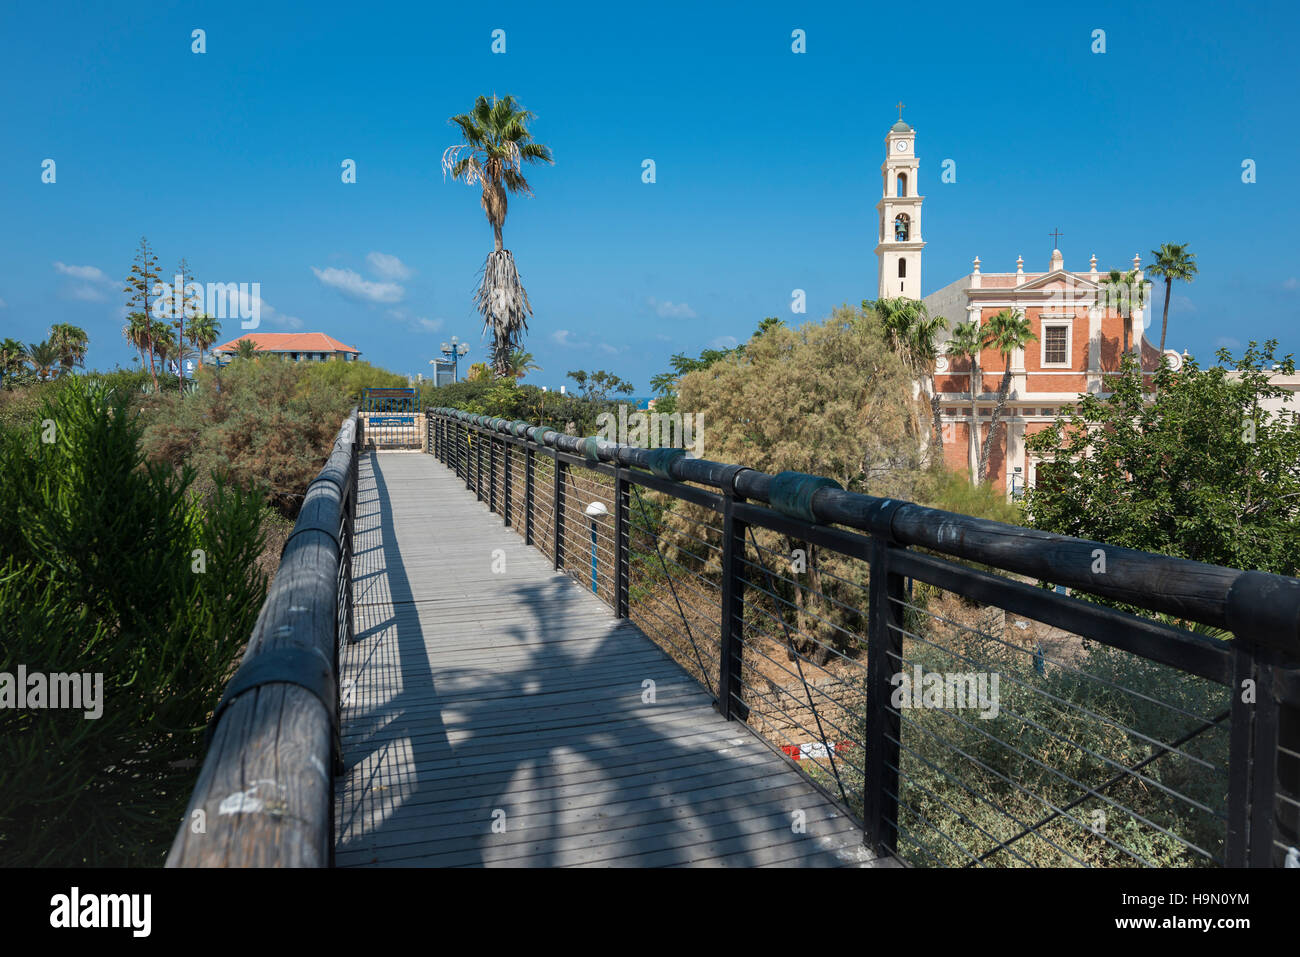 The famous wishing bridge in Jaffa with St. Peter's Church seen in the background. Israel Stock Photo